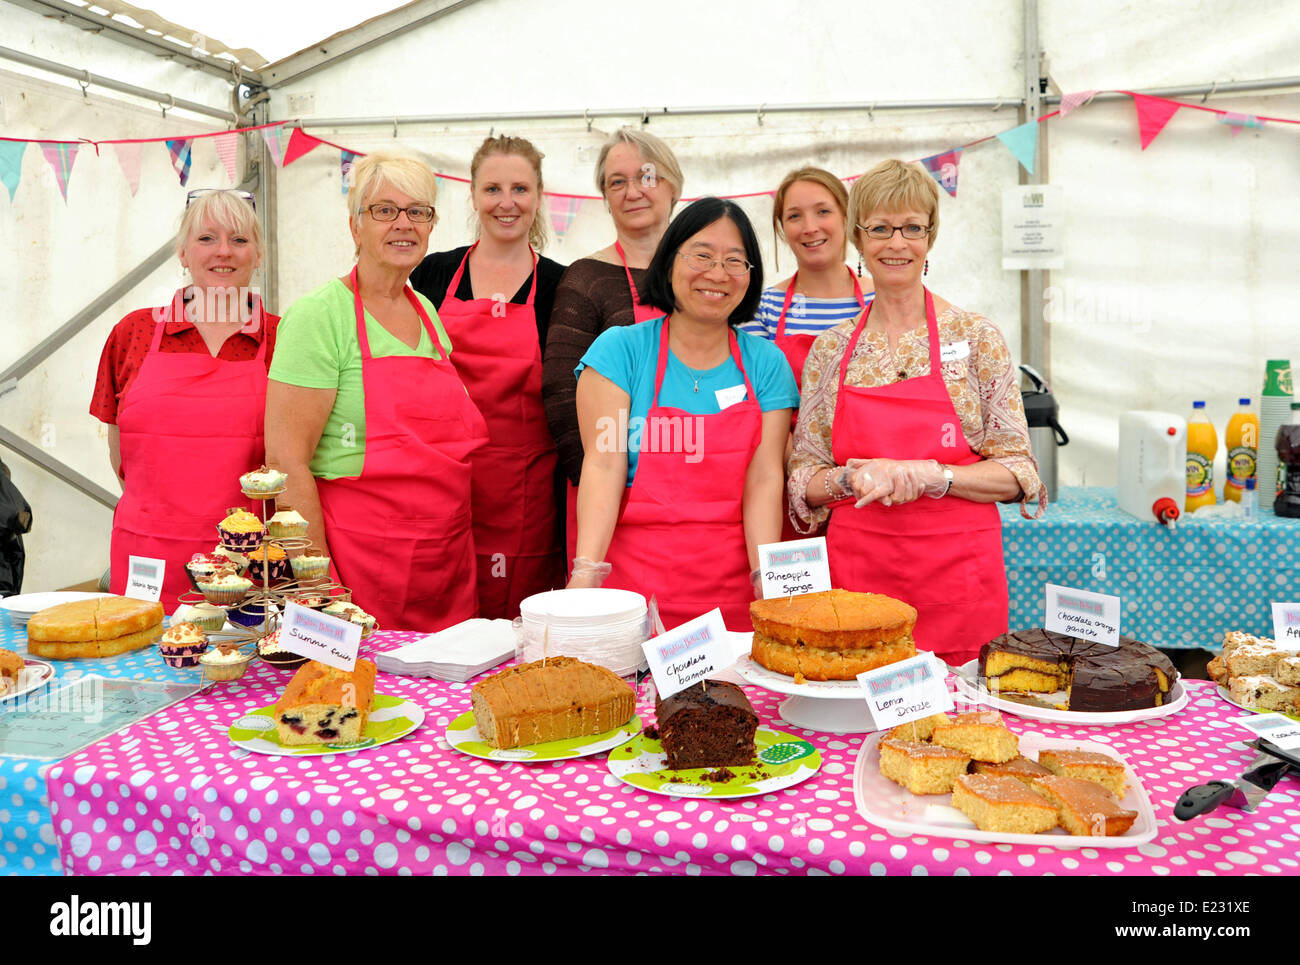 Brighton, Sussex, UK. 14th June 2014. Members of Brighton Belles WI , Hanover Queens WI and the Witches of Bevendean WI joined forces to provide a cake stall at the Loving Our Level Celebration Day in Brighton The Level is a local city centre public park which has had over £2million pounds spent on its rejuvination  Organised with The Level Communities Forum,the event consisted of free entertainment for all, including live bands and music performances, sports and games, children's activities, arts and crafts, community stalls, great food and drink Photograph taken by Simon Dack/Alamy Live News Stock Photo